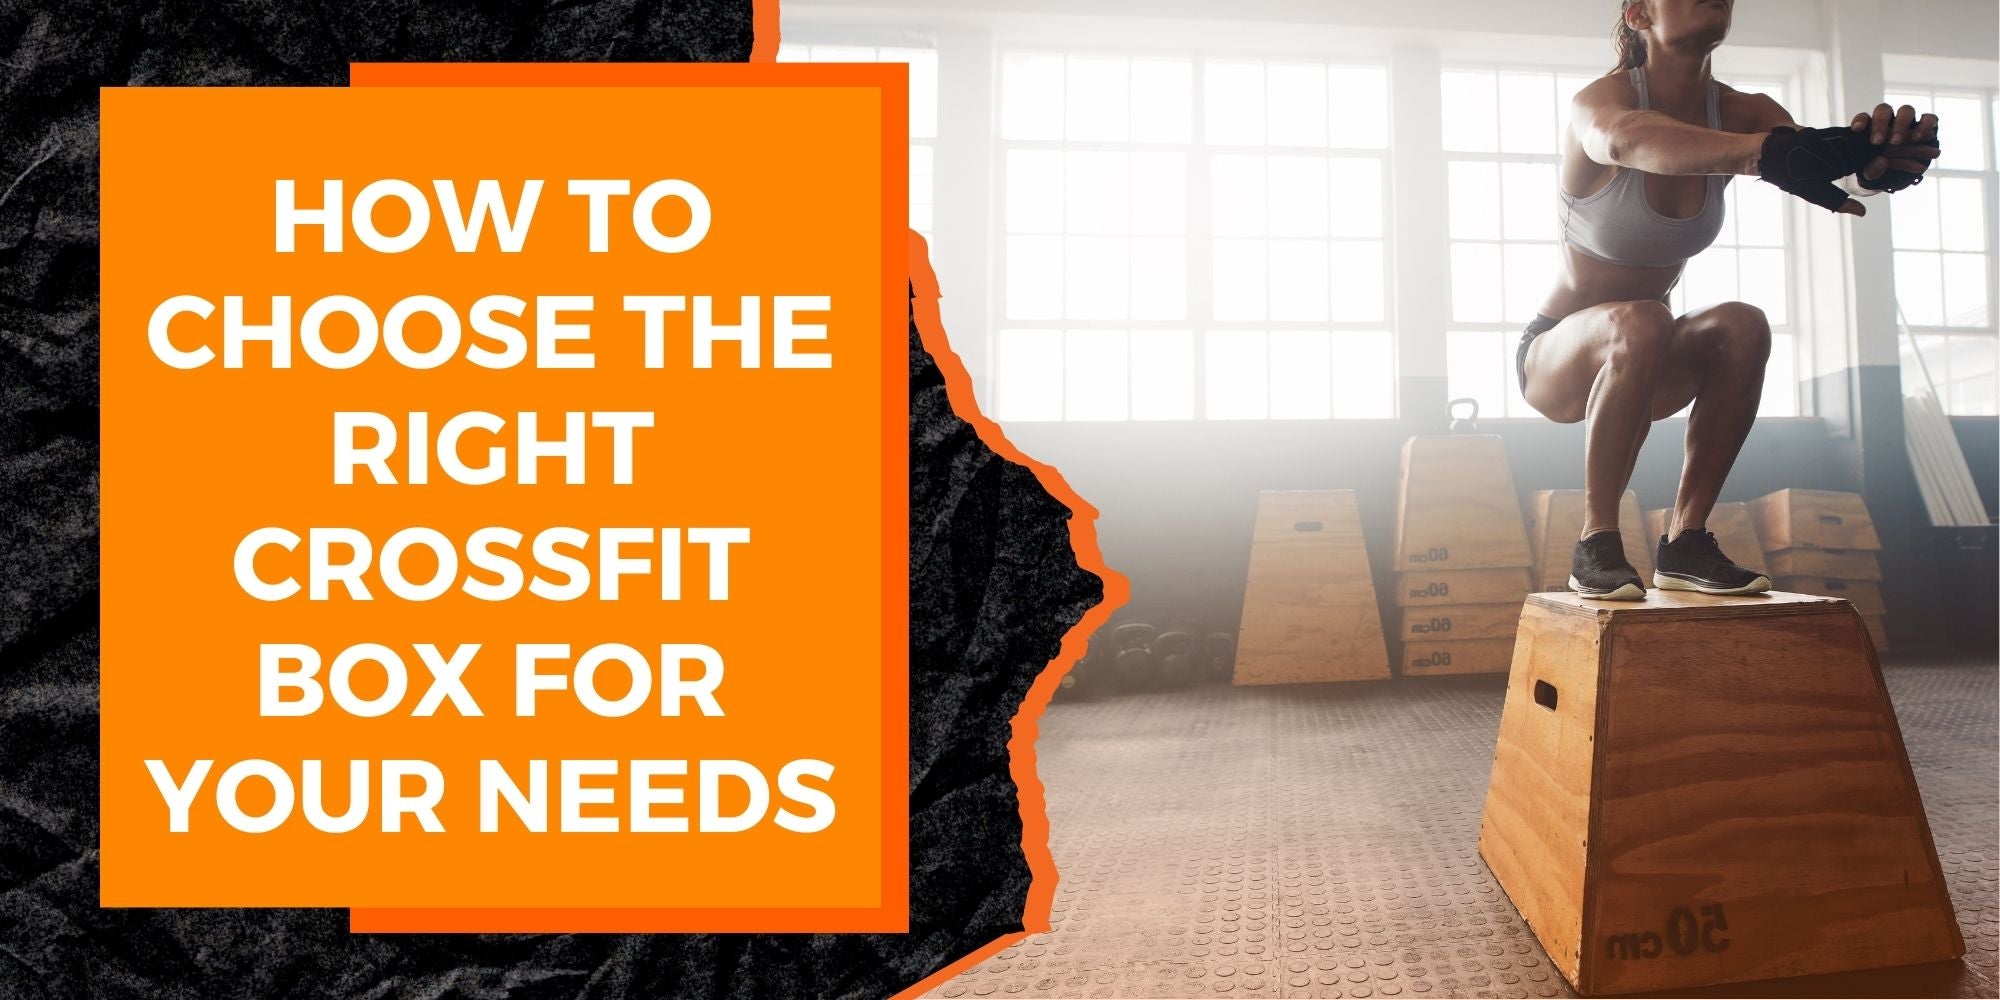 How to Choose the Right CrossFit Box for Your Needs